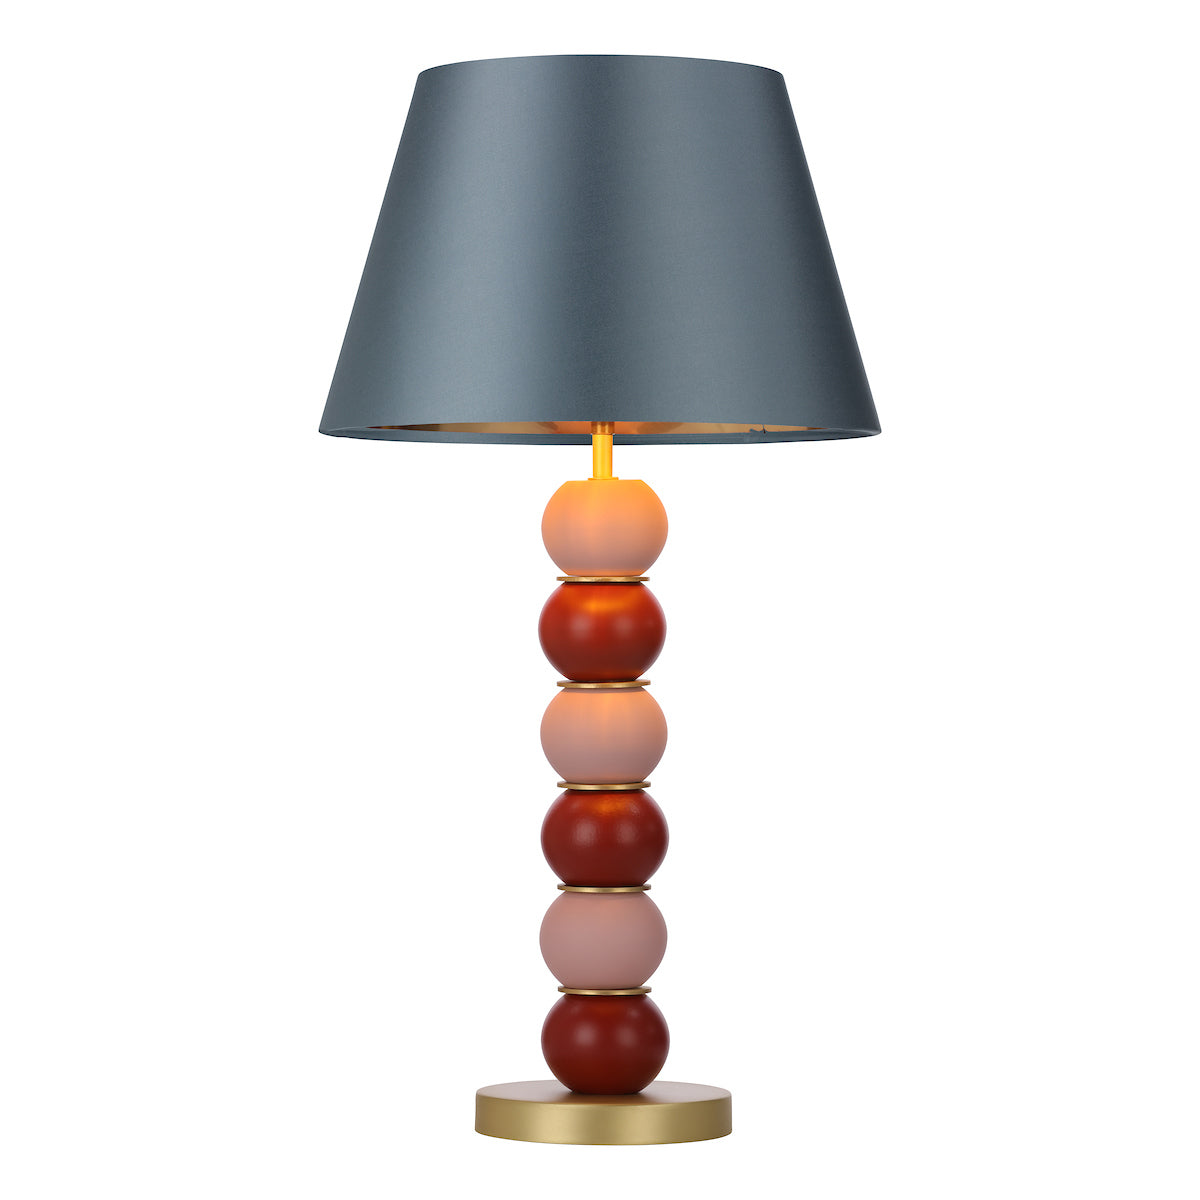 Bobble table lamp in Strawberry & Blush Pink Base Only